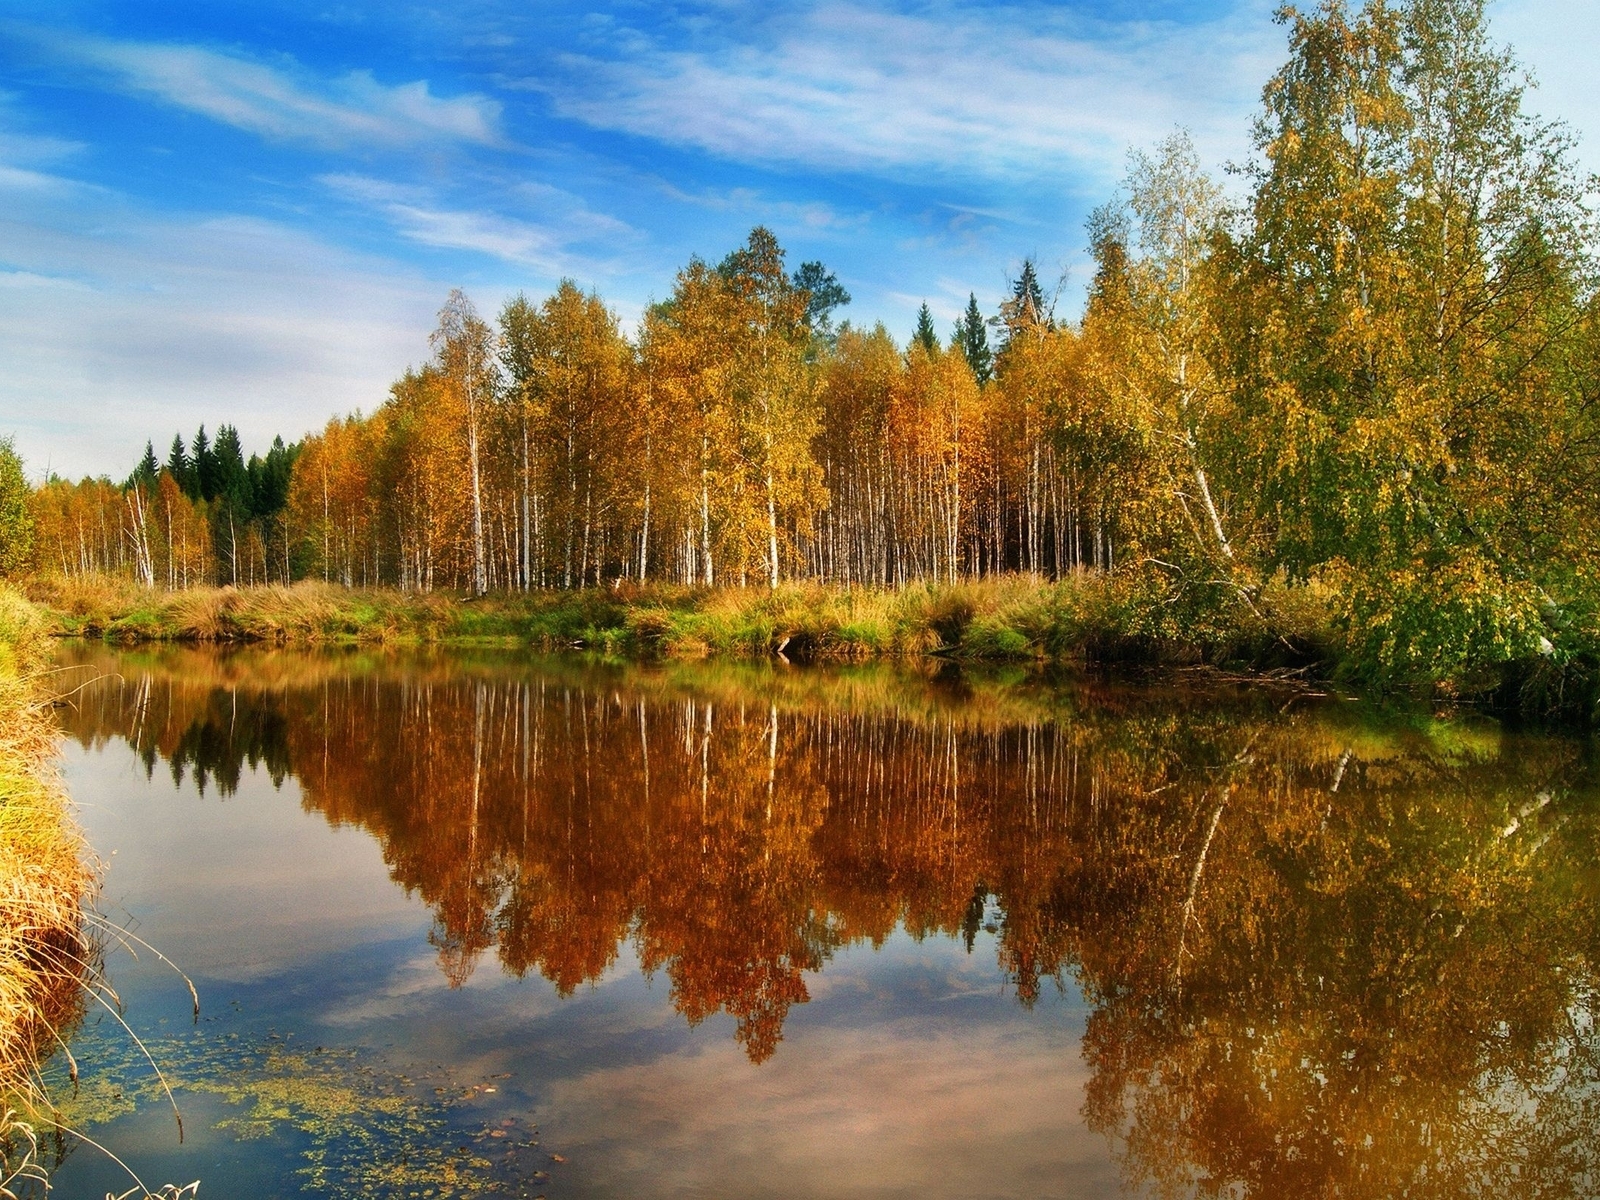 Image: Autumn, trees, foliage, grass, reflection, lake, water, day, sky, clouds